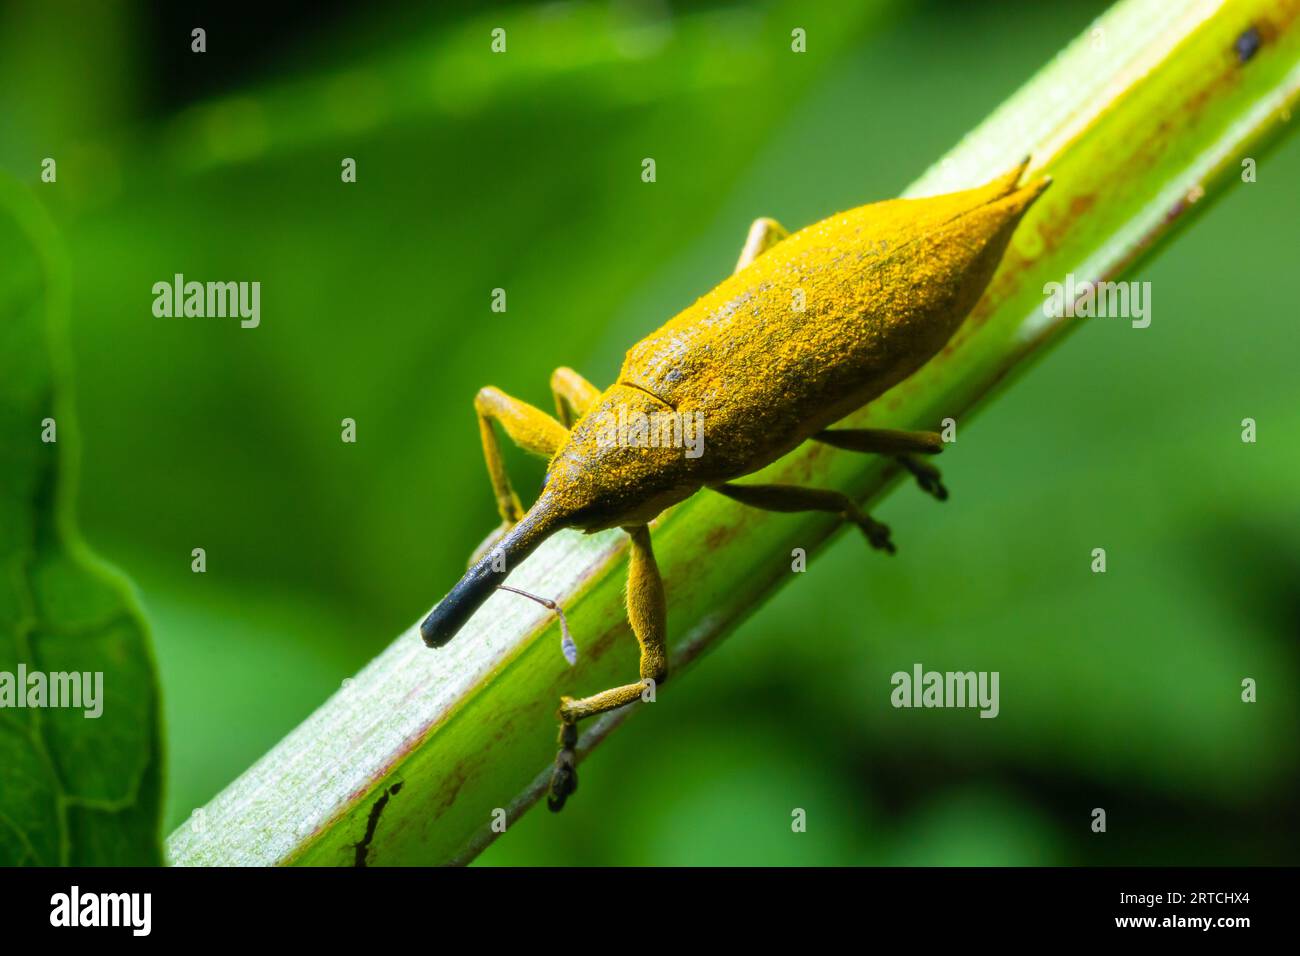 The beetle beetle, also known as the nunus, is a beetle that belongs to the superfamily Curculionoidea, known for its elongated snout.insects animals Stock Photo